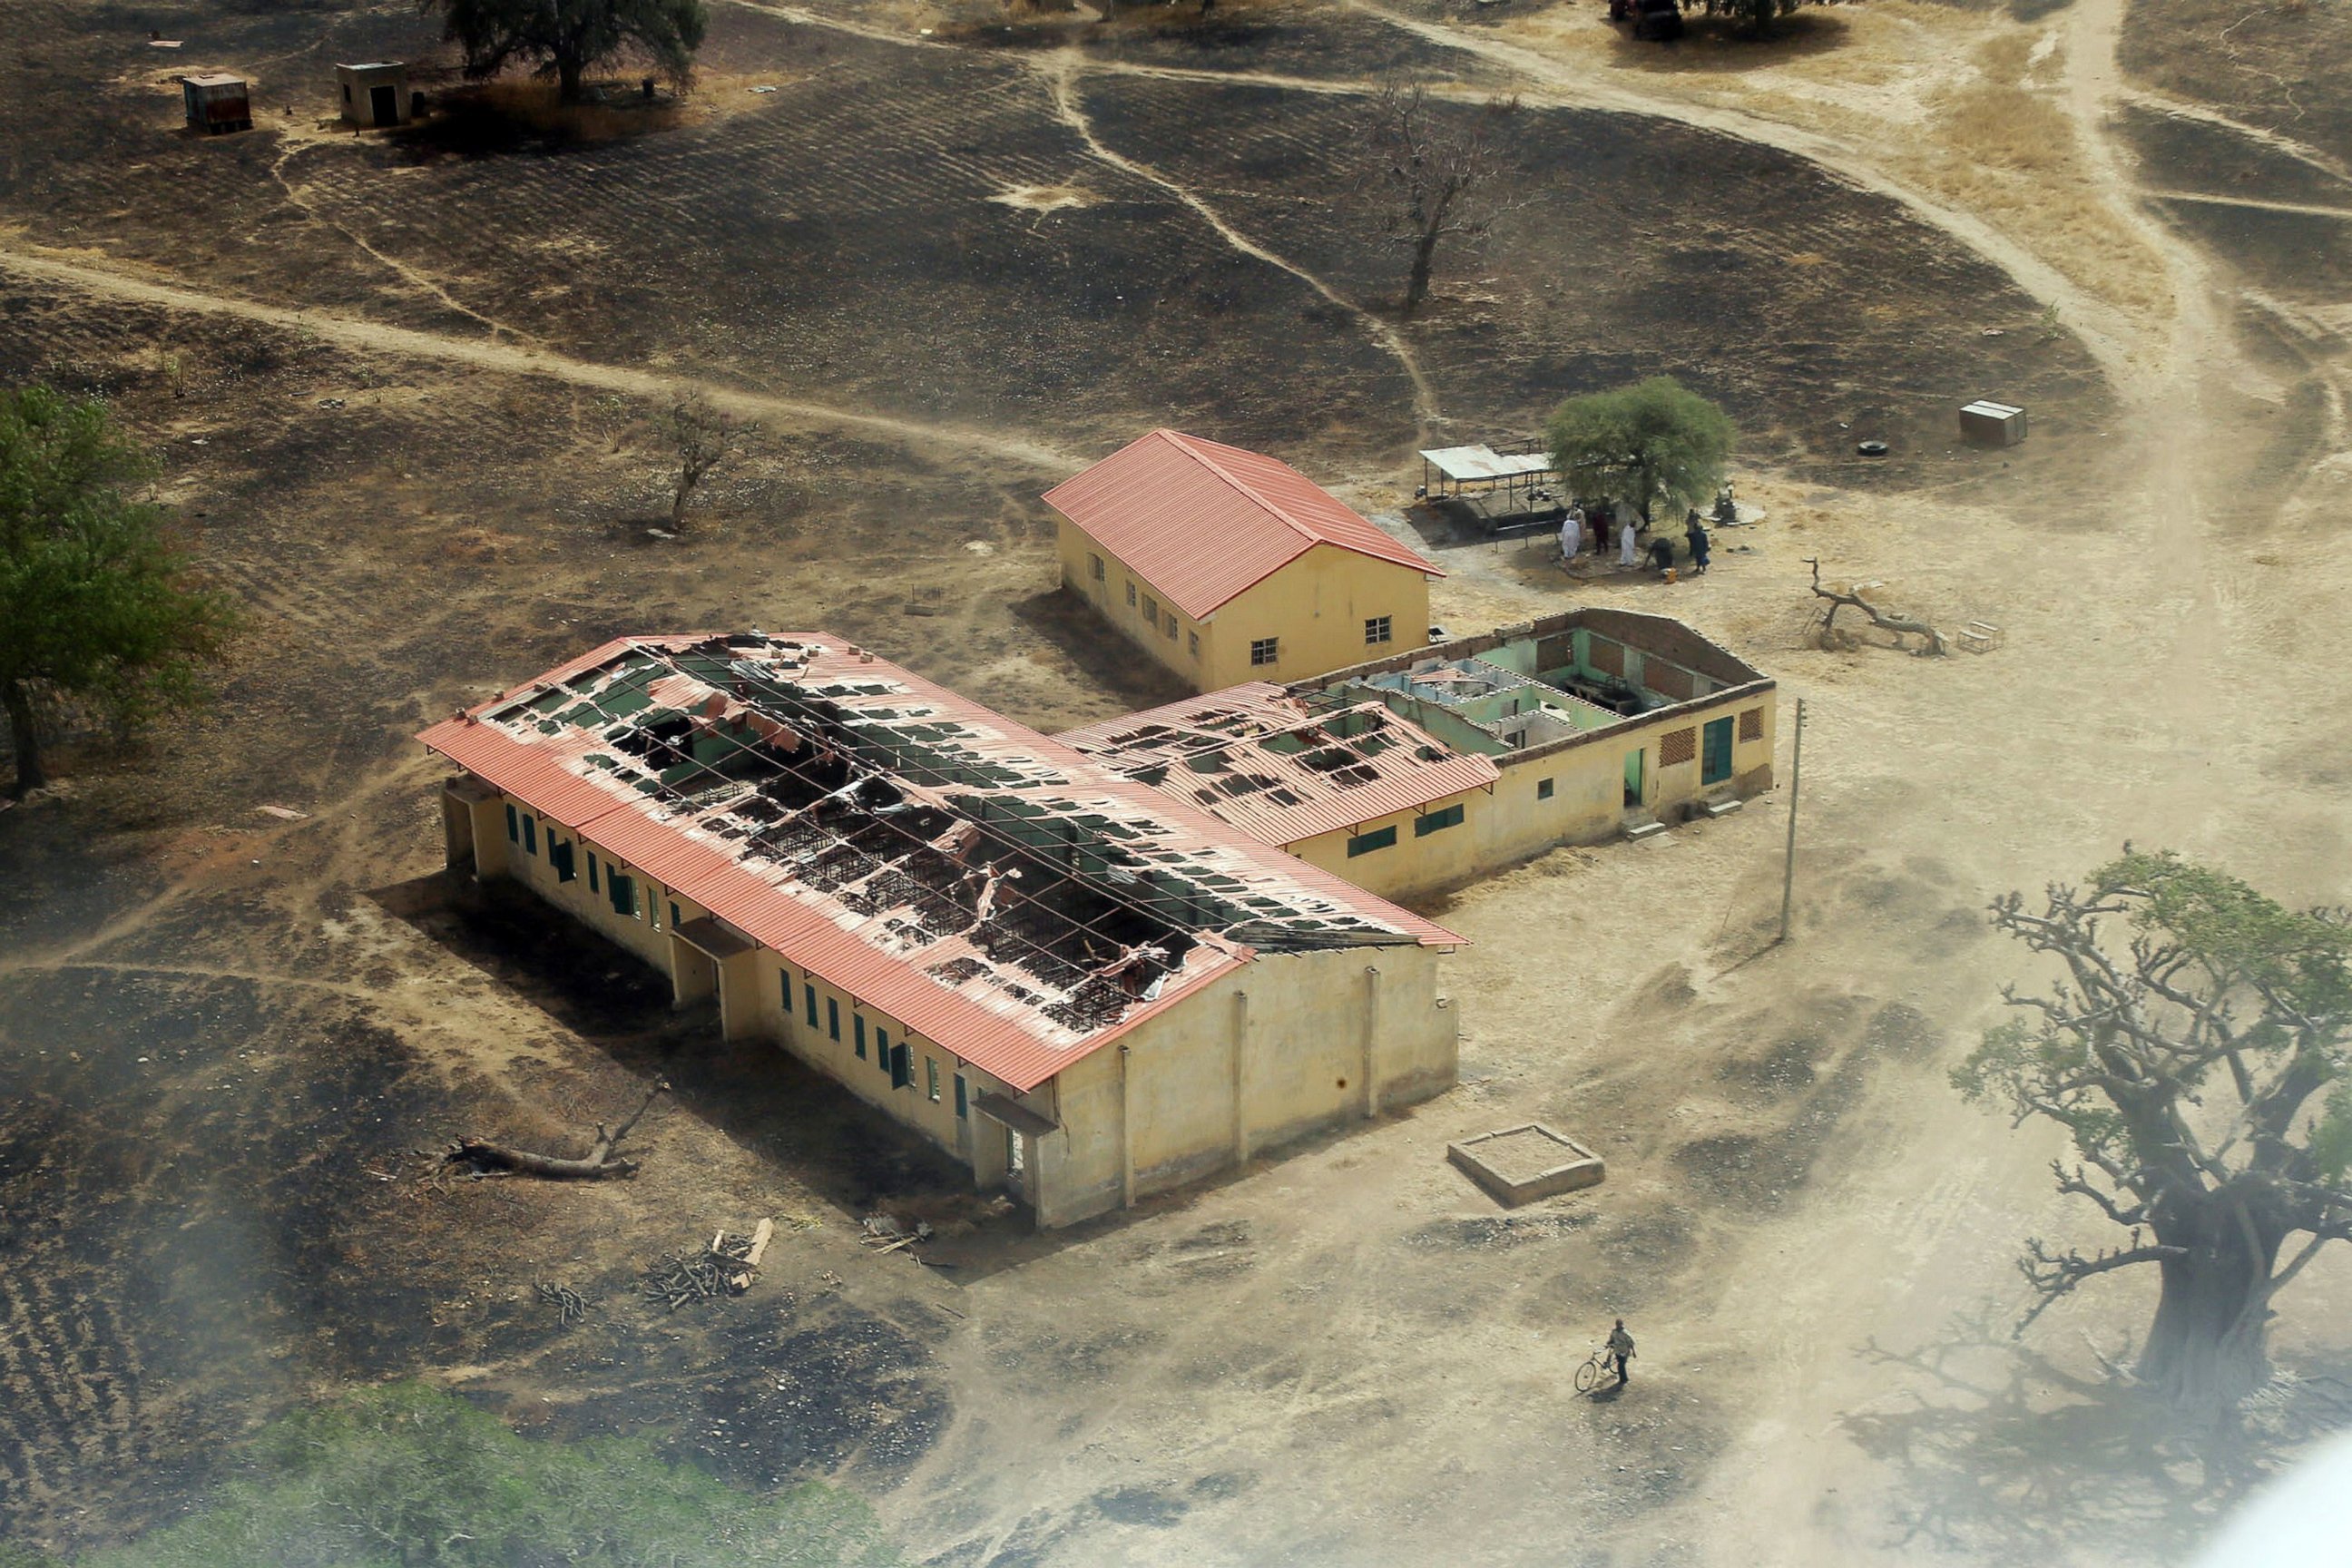 PHOTO: An arial view of the burnt-out classrooms of a school in Chibok, in Northeastern Nigeria, from where Boko Haram Islamist fighters seized 276 teenagers on the evening of April 14, 2014.  